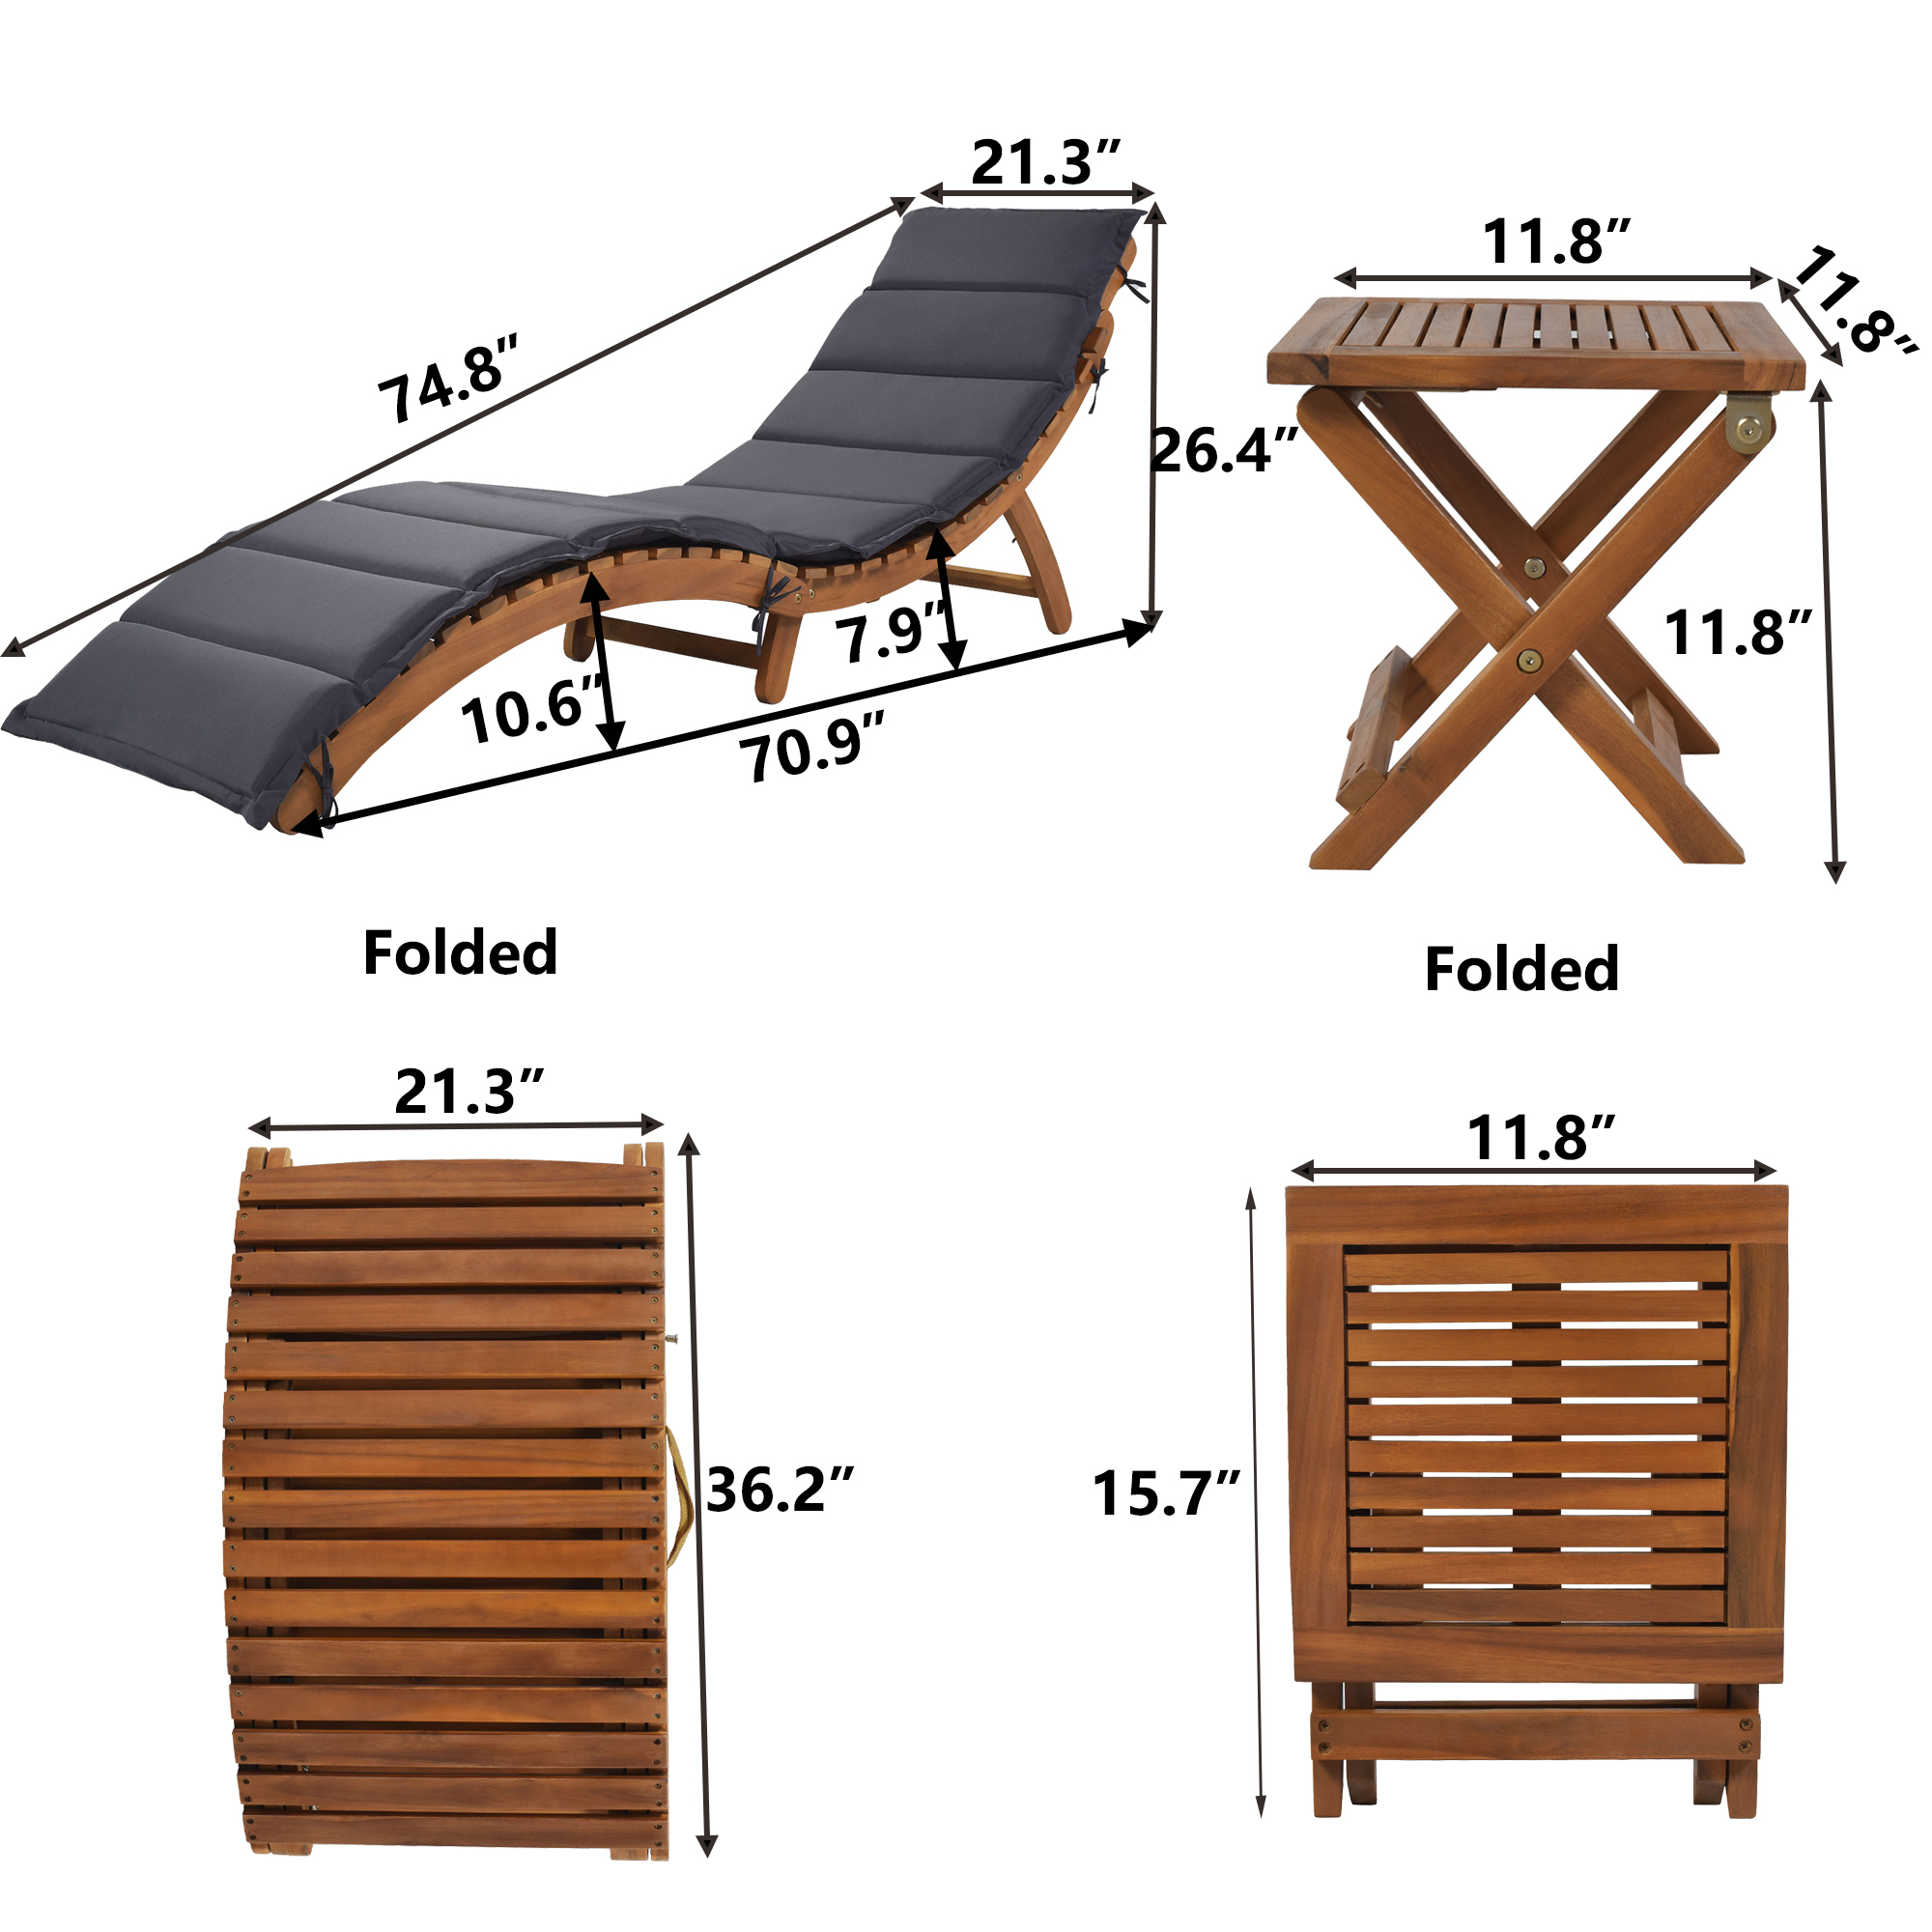 ENYOPRO Patio Lounge Chairs Set of 3, Outdoor Wood Portable Chaise Lounge Chairs with Foldable Tea Table and Cushions, Fit for Pool Porch Backyard Patio, Brown Finish + Dark Gray Cushion, K2702 - image 4 of 8